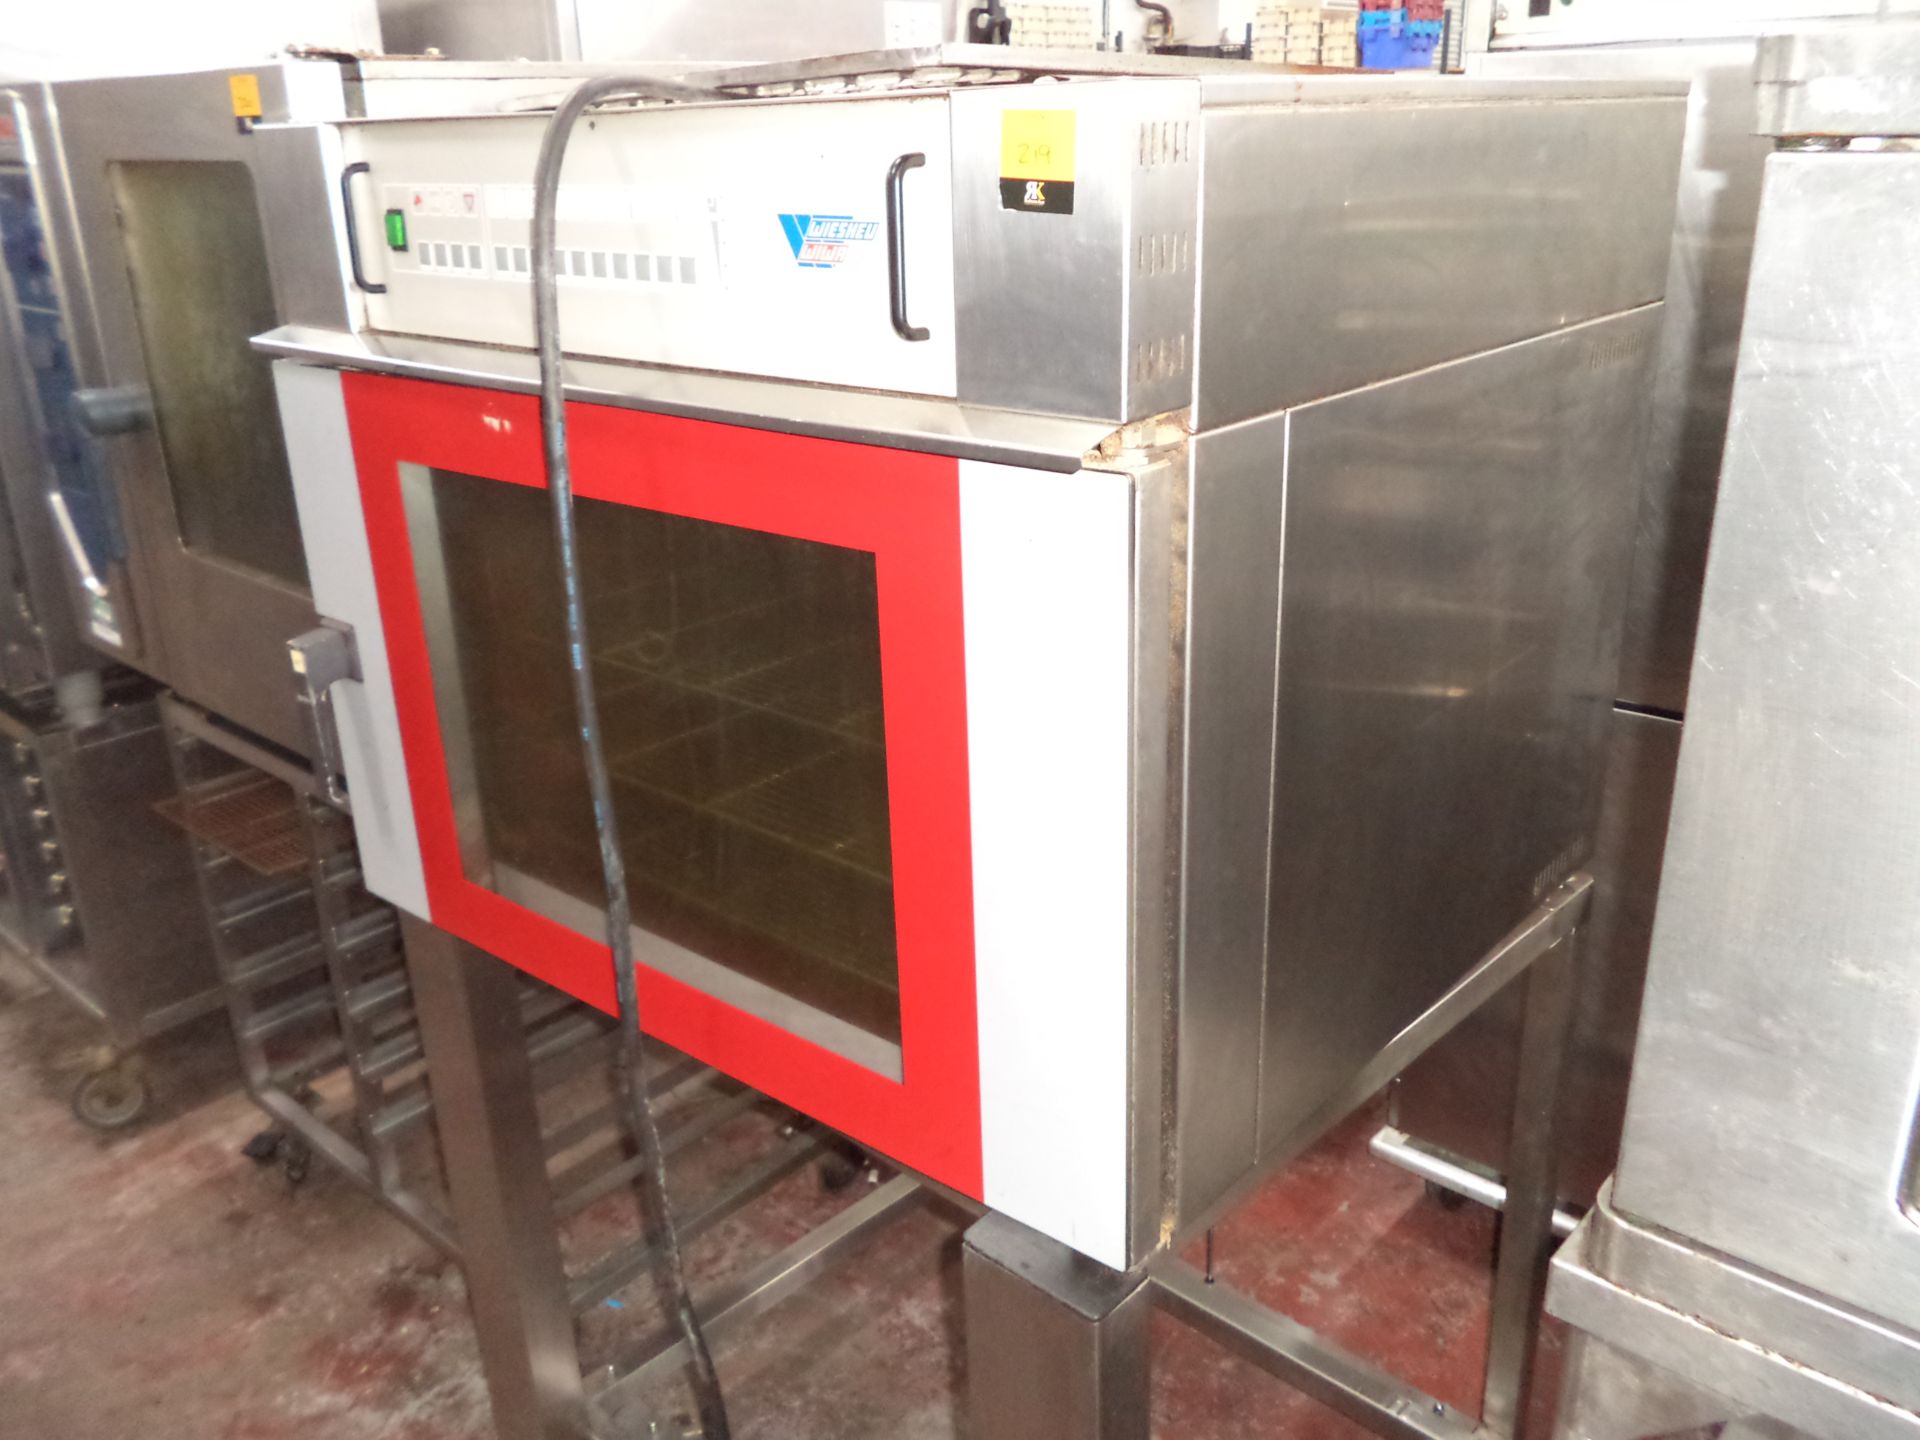 Wiesheu Wiwa touchscreen control multifunction oven IMPORTANT: Please remember goods successfully